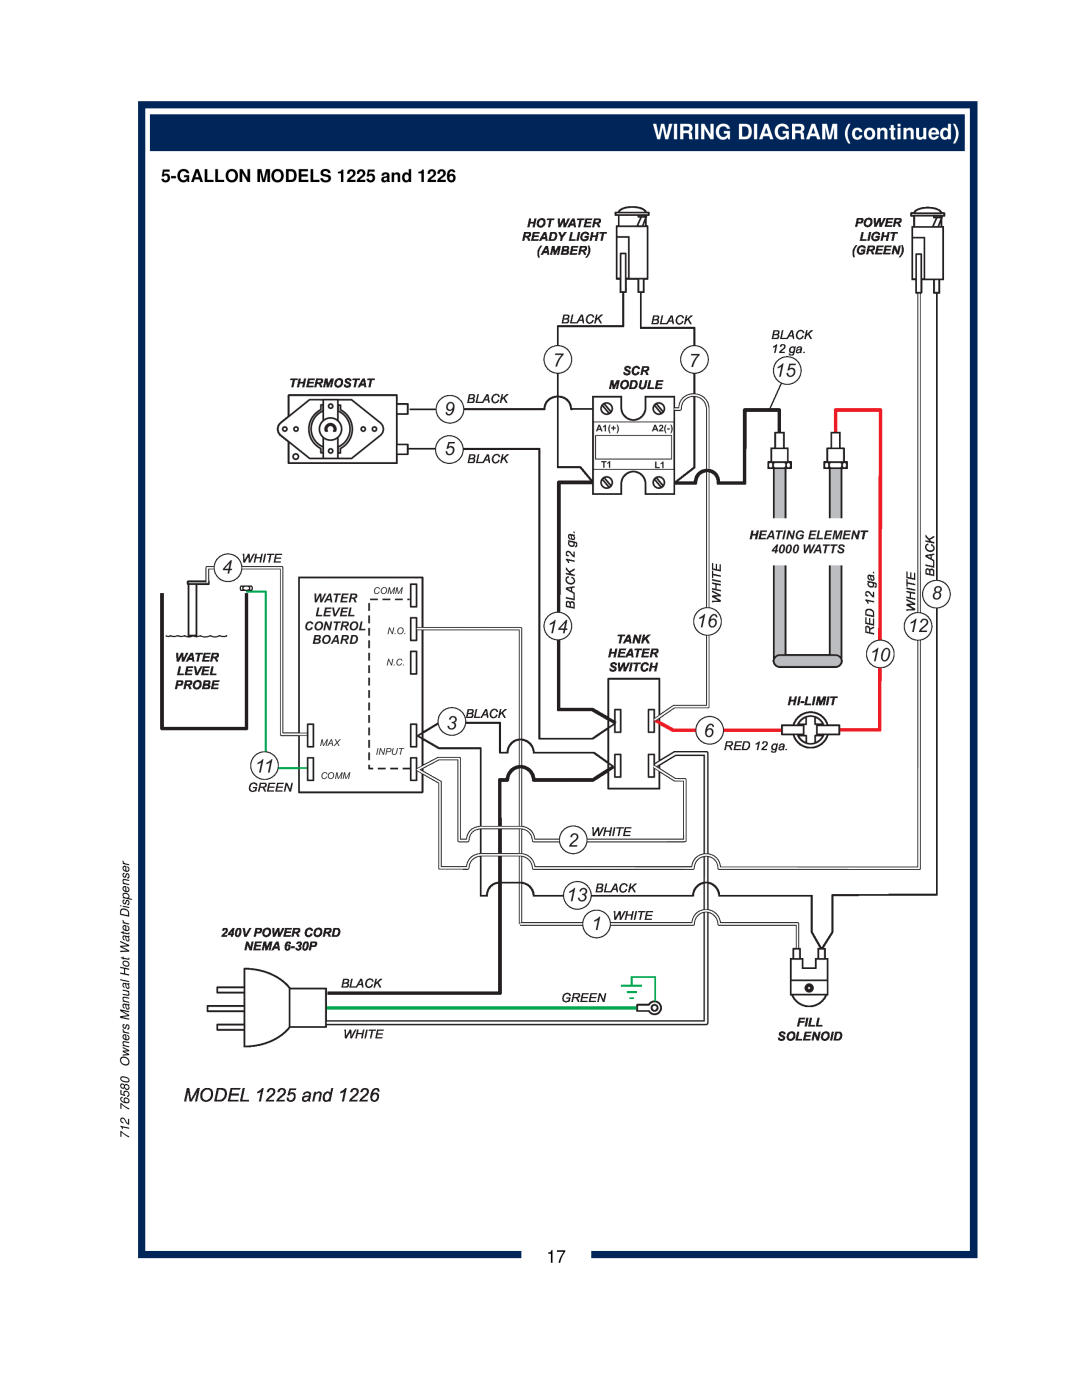 Wells 1222 1222CA owner manual WIRING DIAGRAM continued, MODEL 1225 and, GALLON MODELS 1225 and 